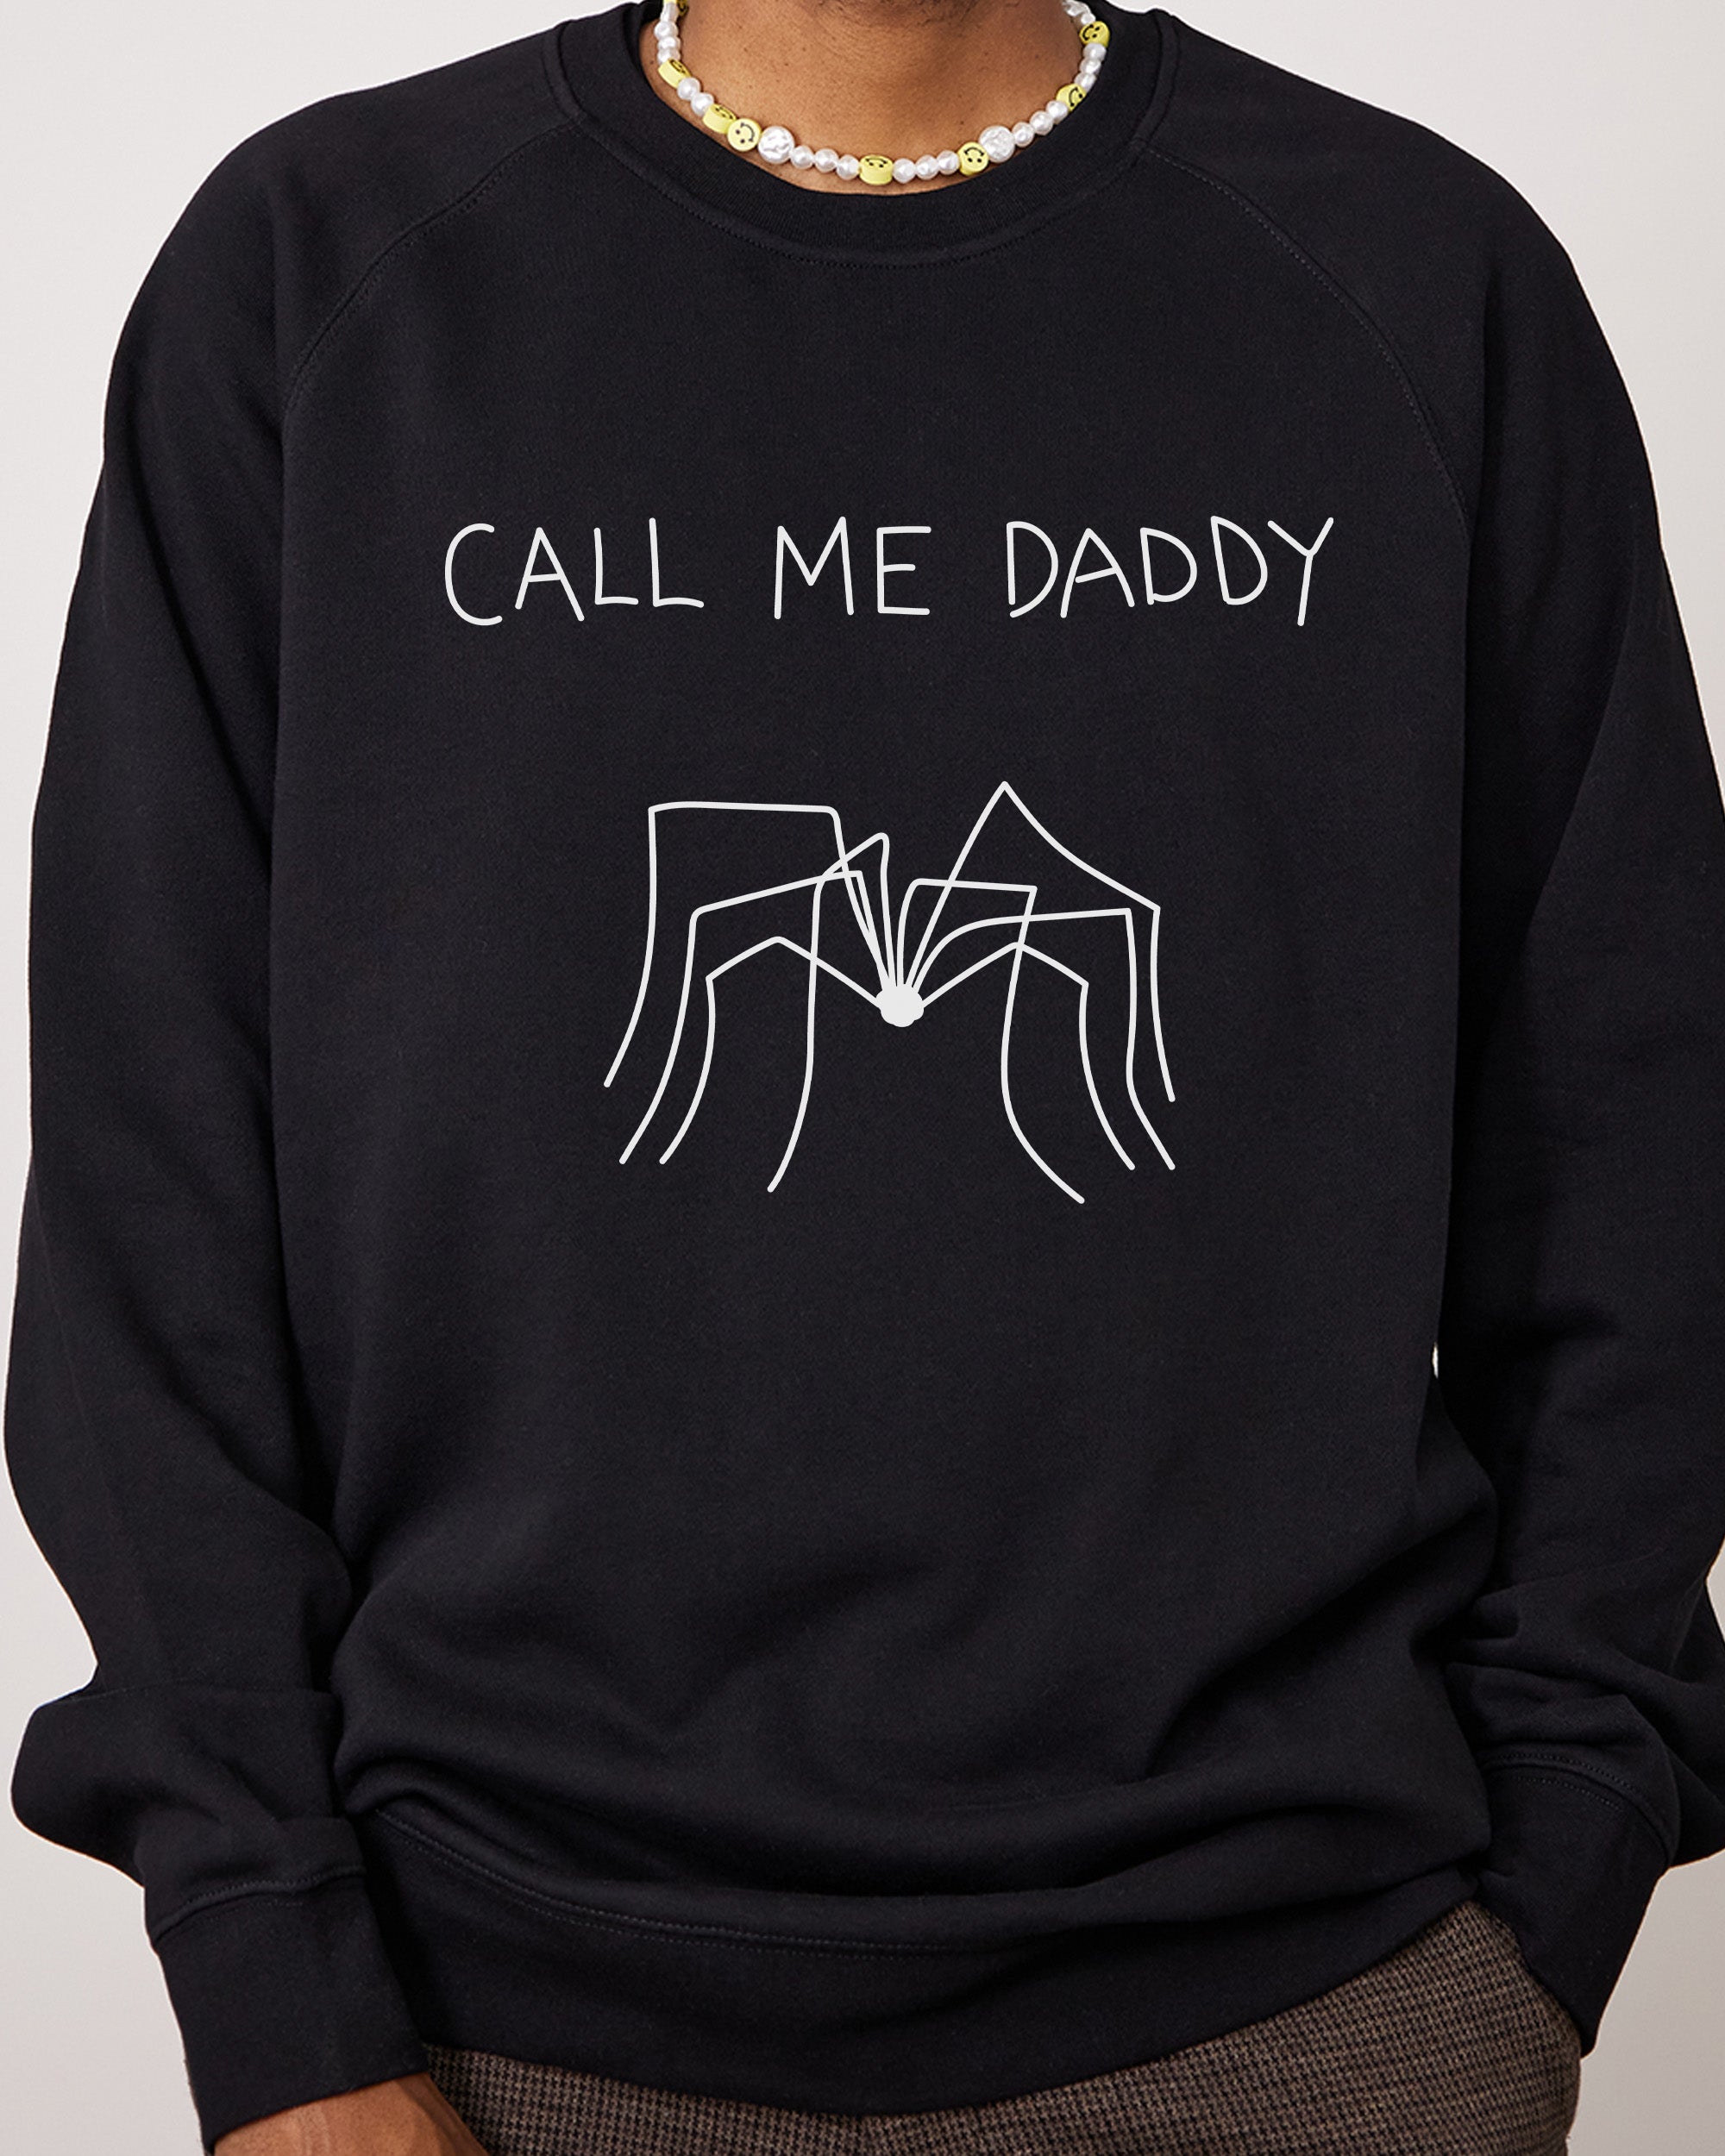 Who's Your Daddy Sweater Australia Online